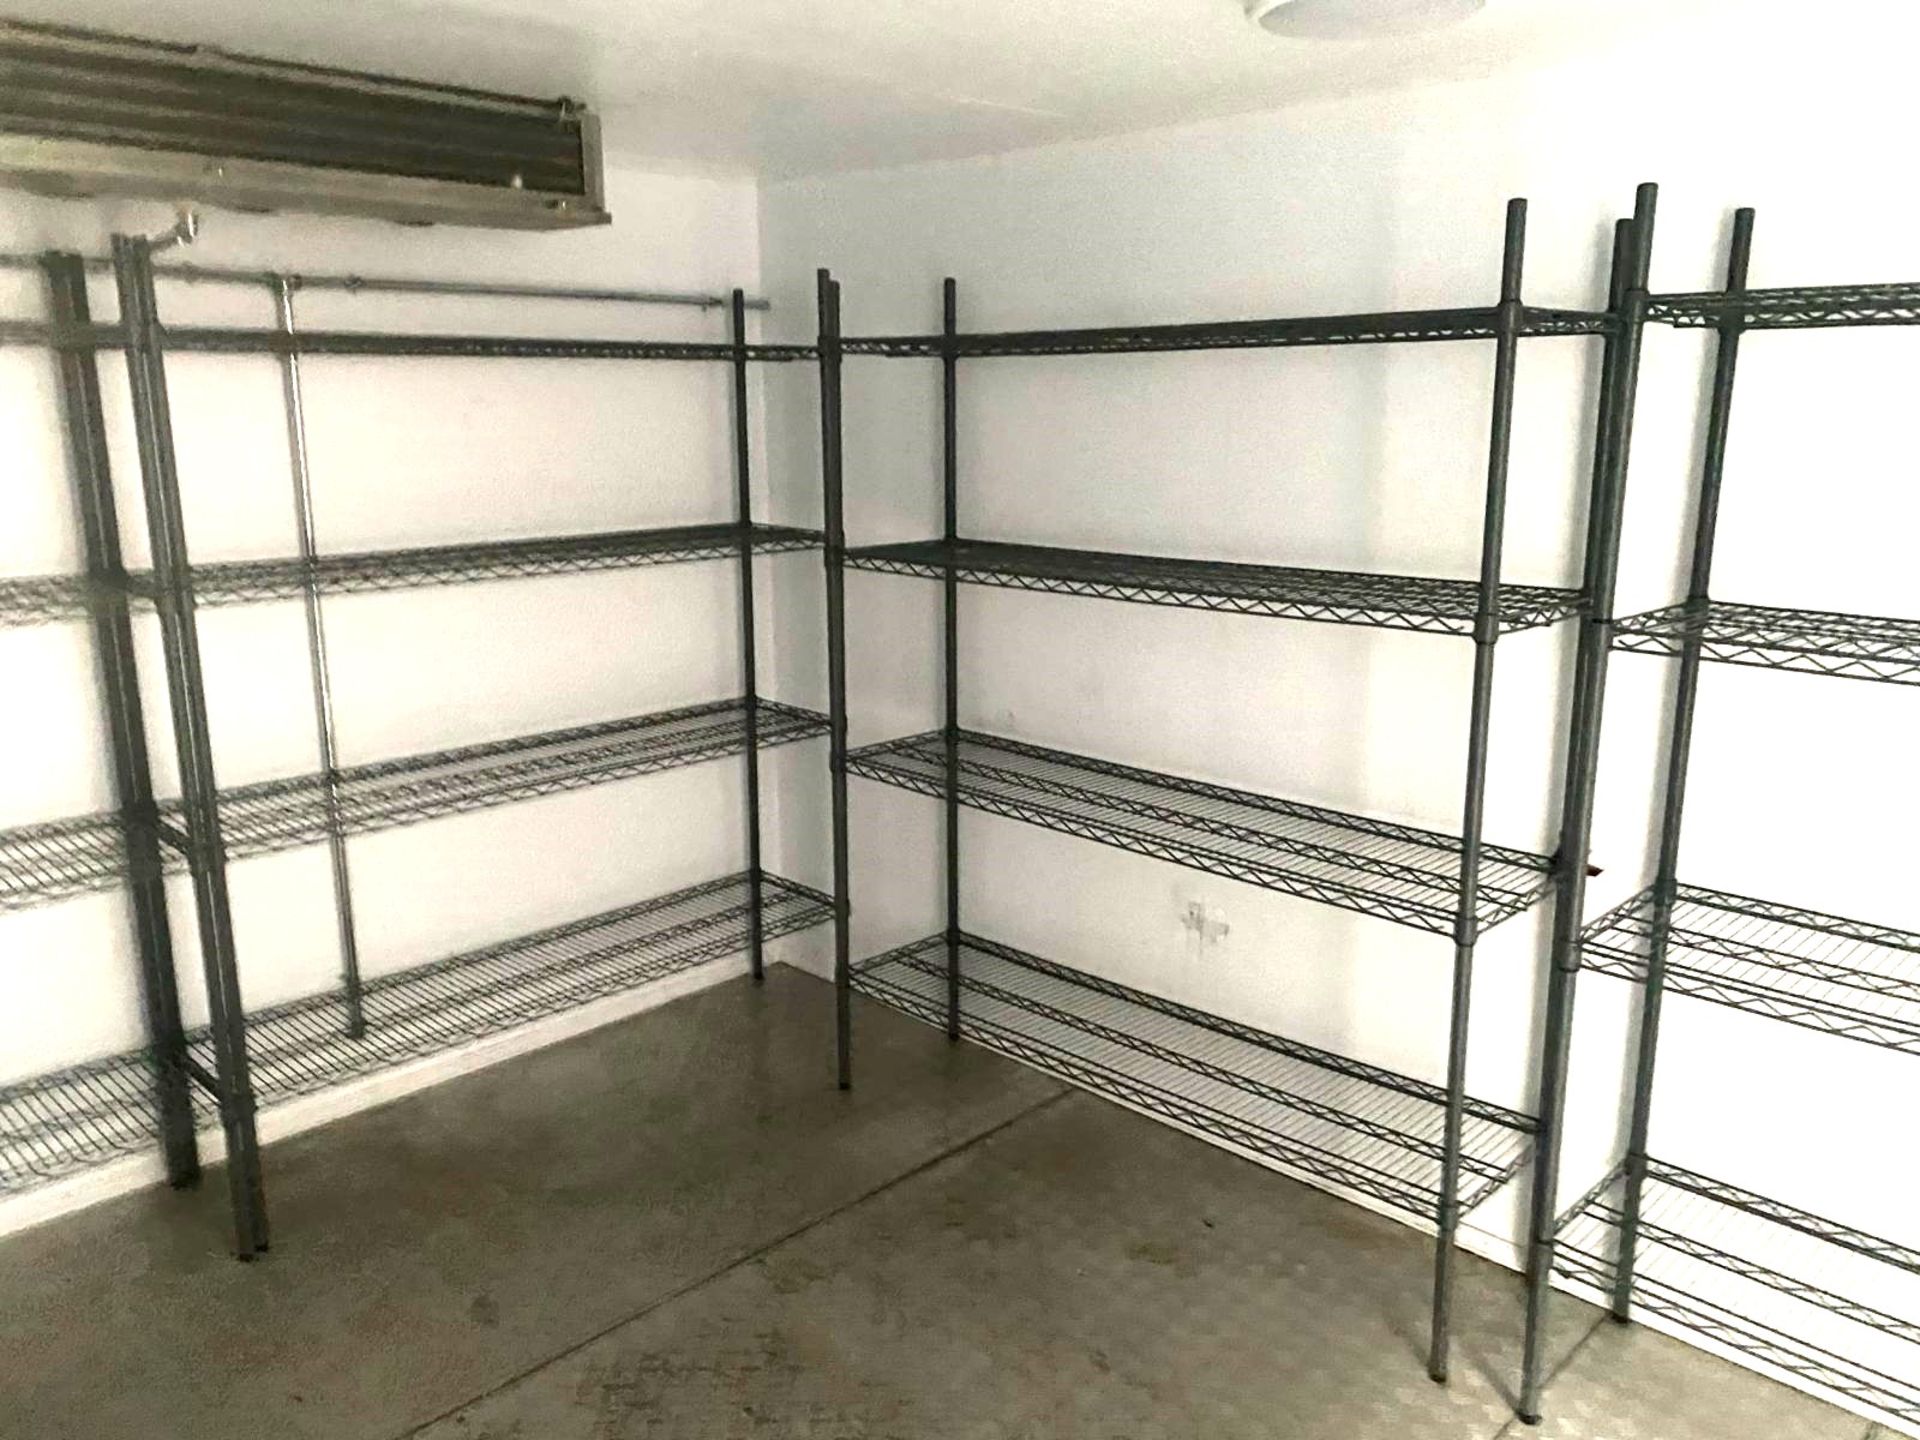 1 x Commercial Kitchen Wire Storage Rack - Image 2 of 2